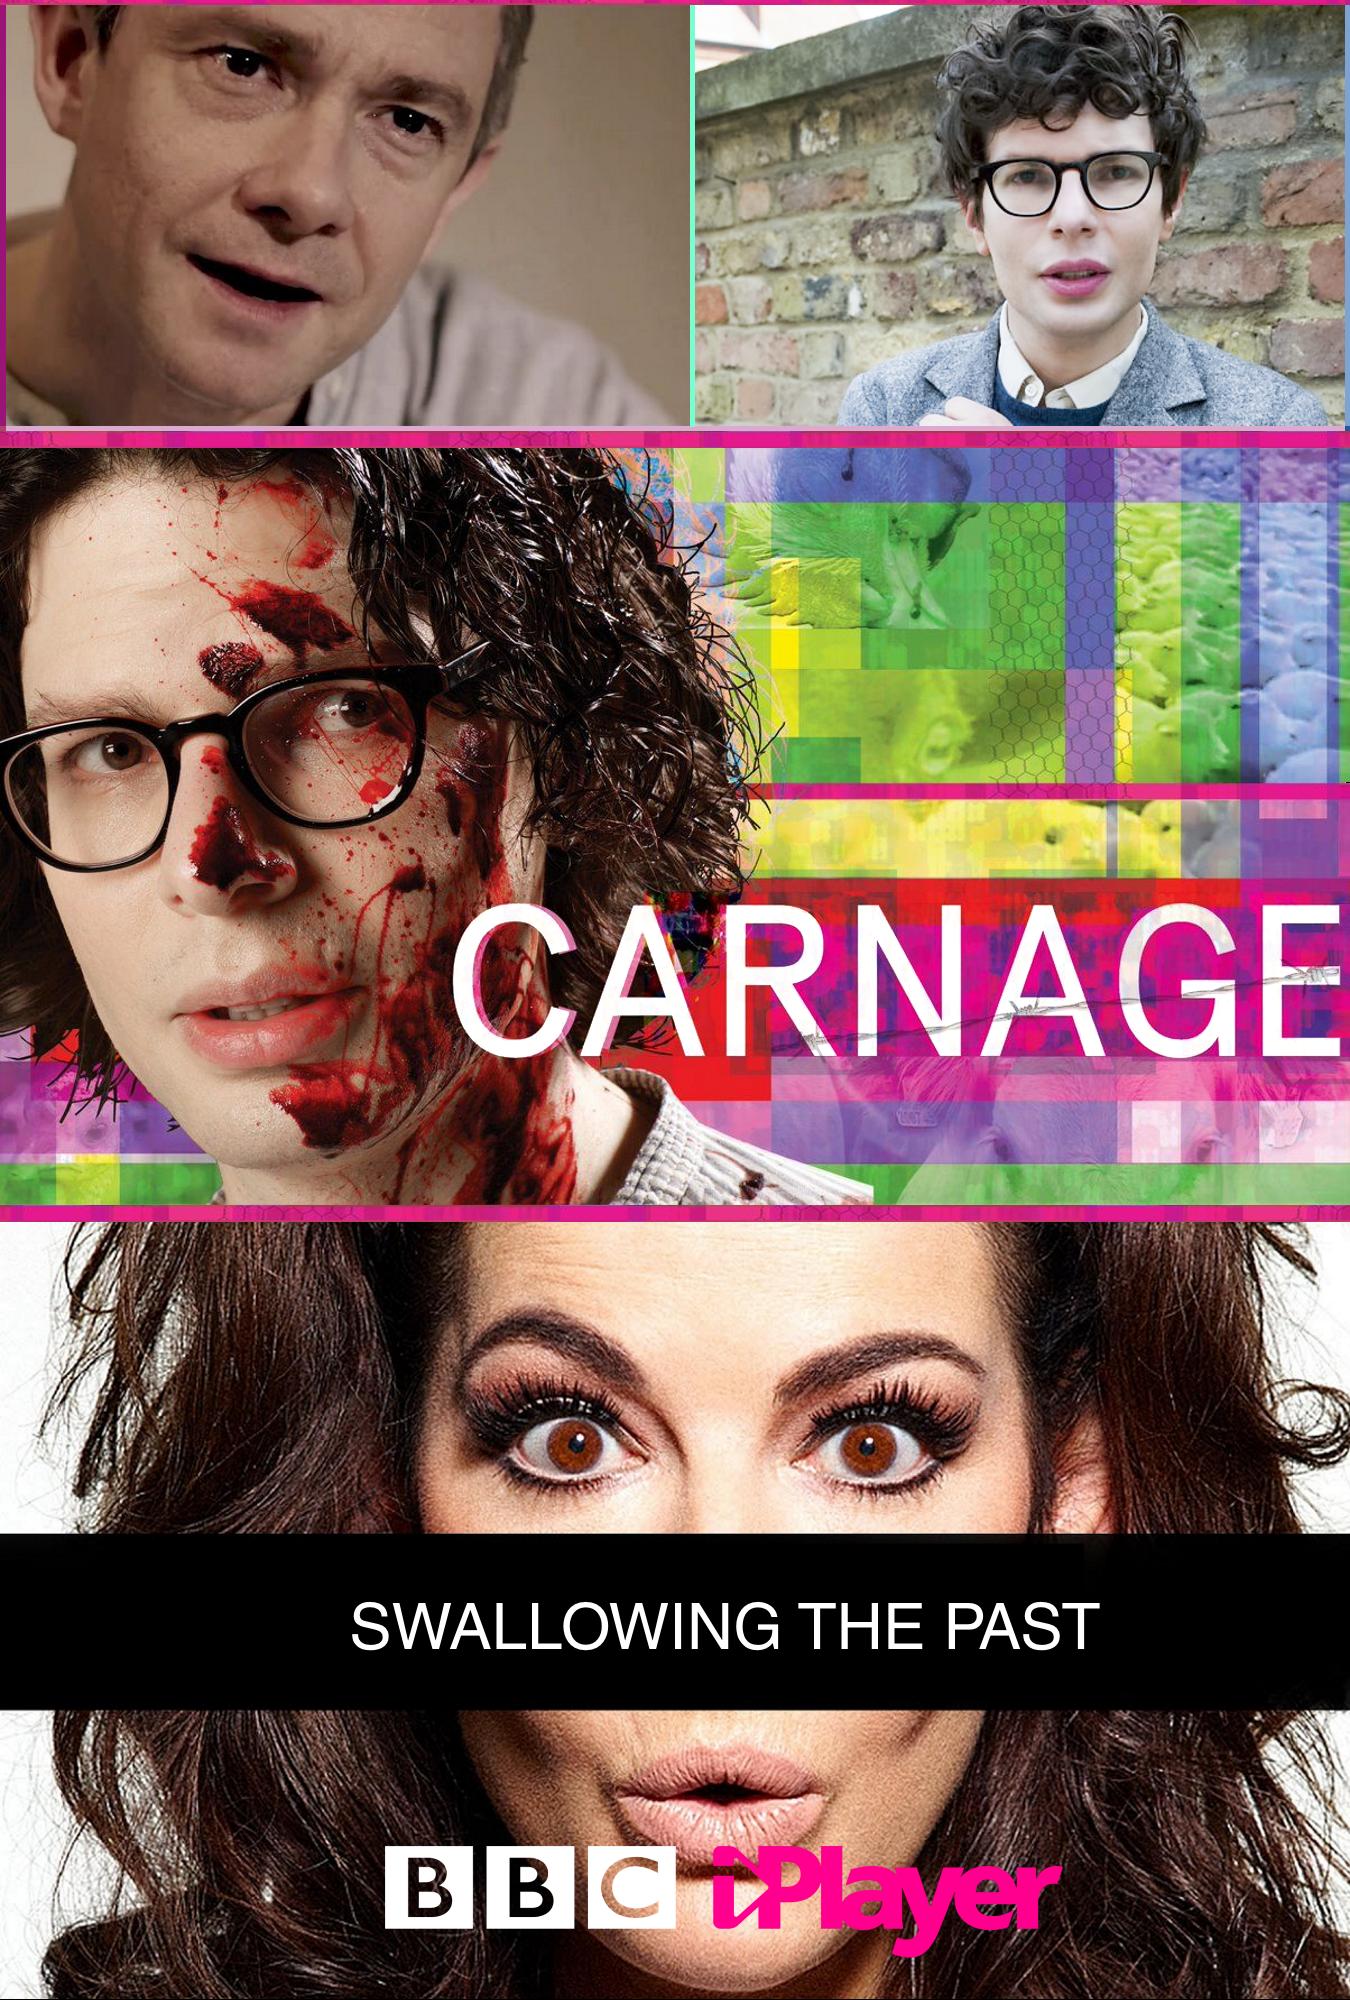 You are currently viewing دانلود فیلم کارنیج(کشتار) Carnage, Swallowing The Past 2017 قورت دادن گذشته- زیرنویس فارسی